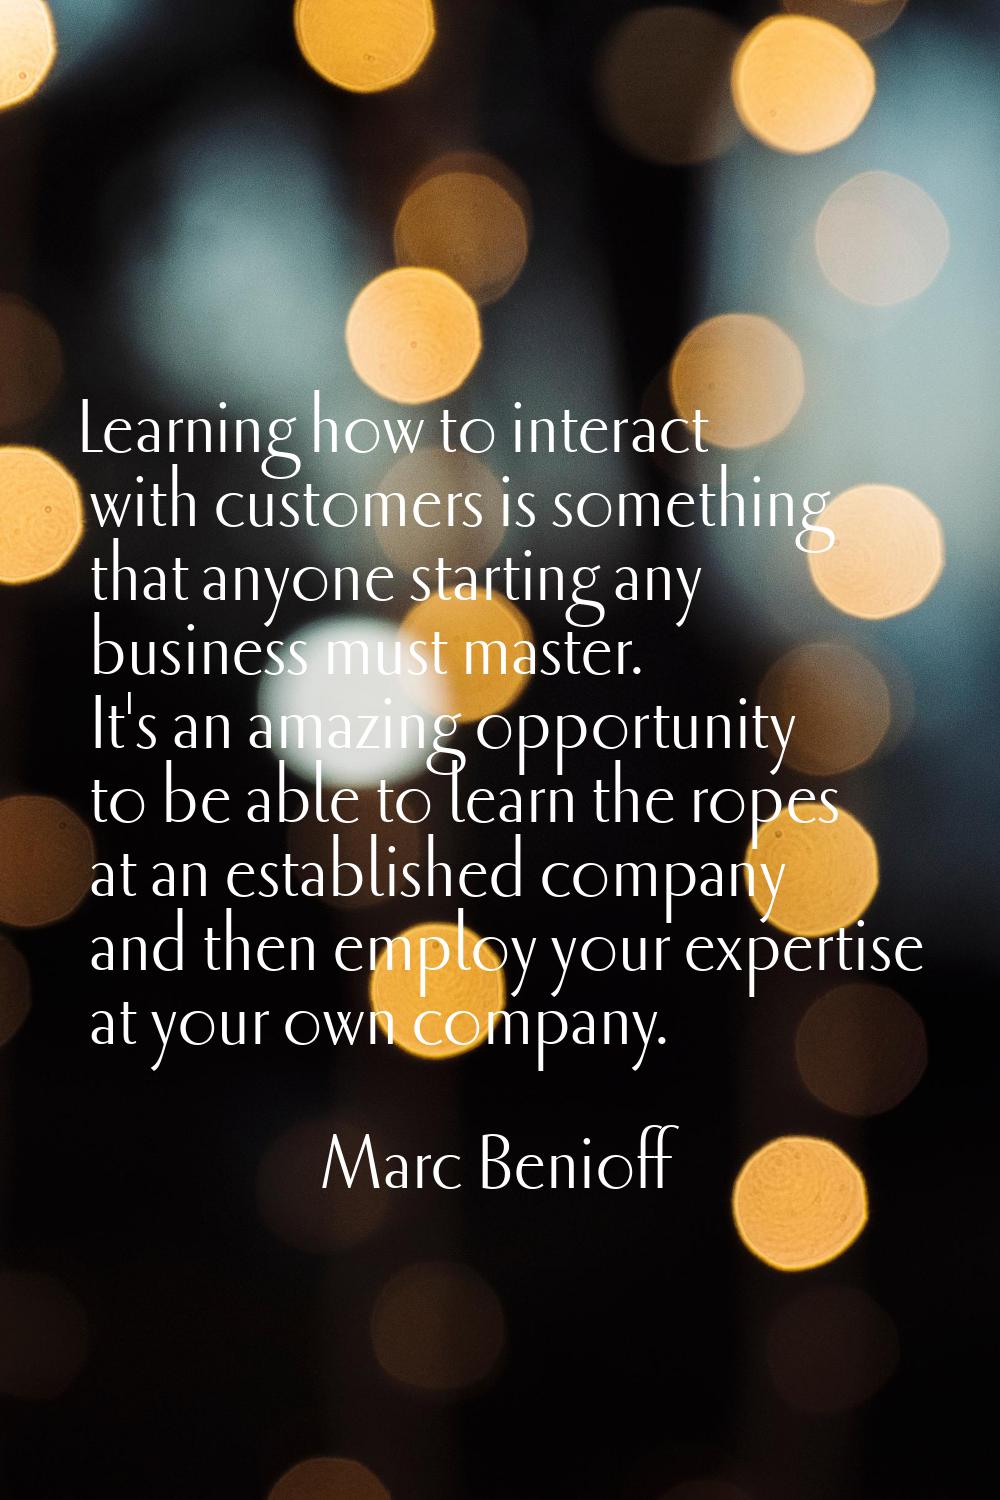 Learning how to interact with customers is something that anyone starting any business must master.